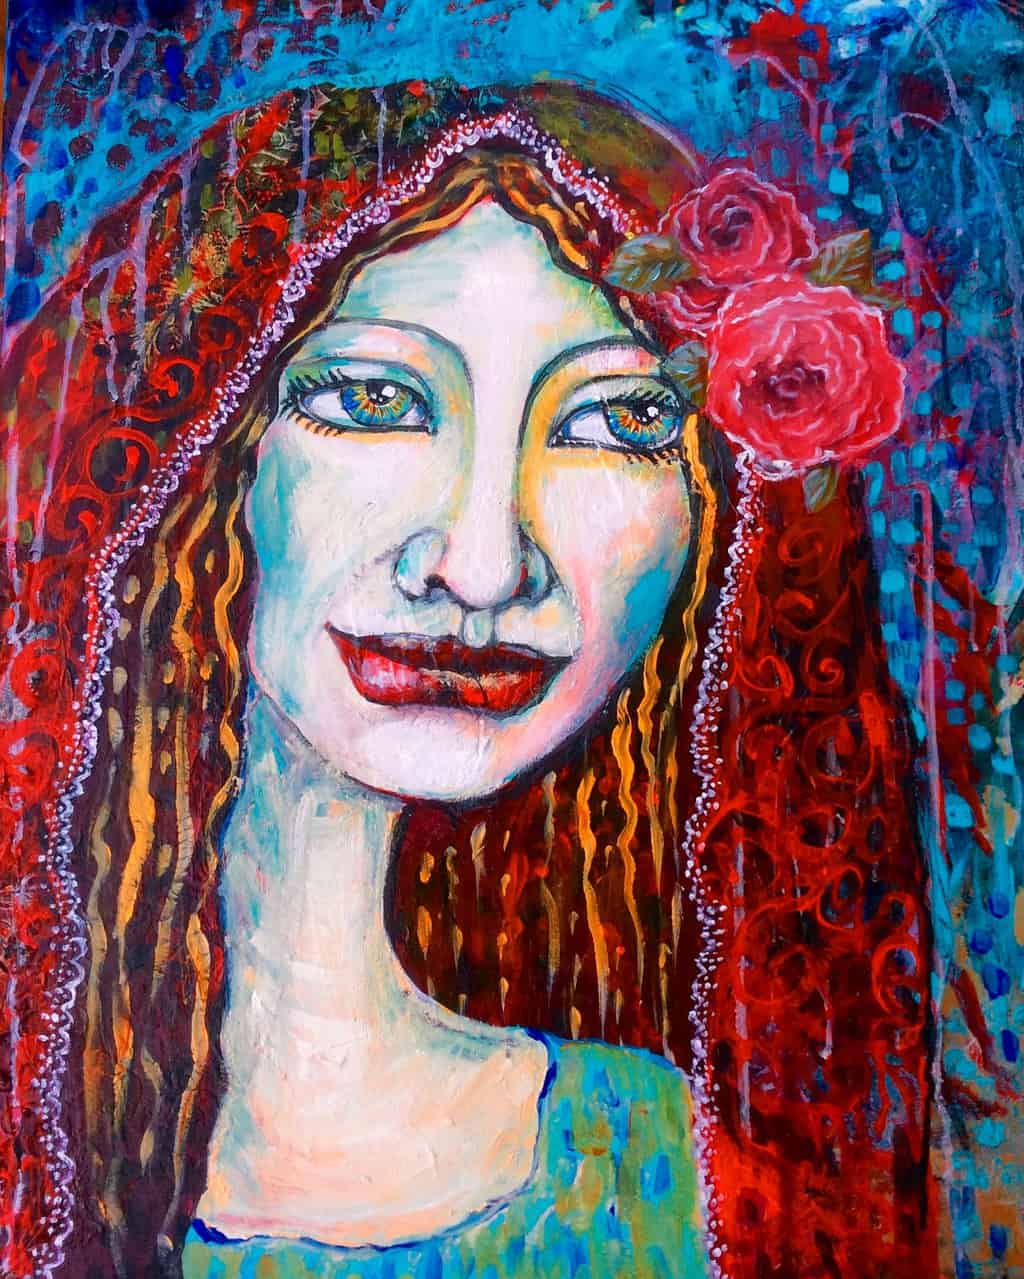 The red veil | Cheryle Bannon - Intuitive Artist